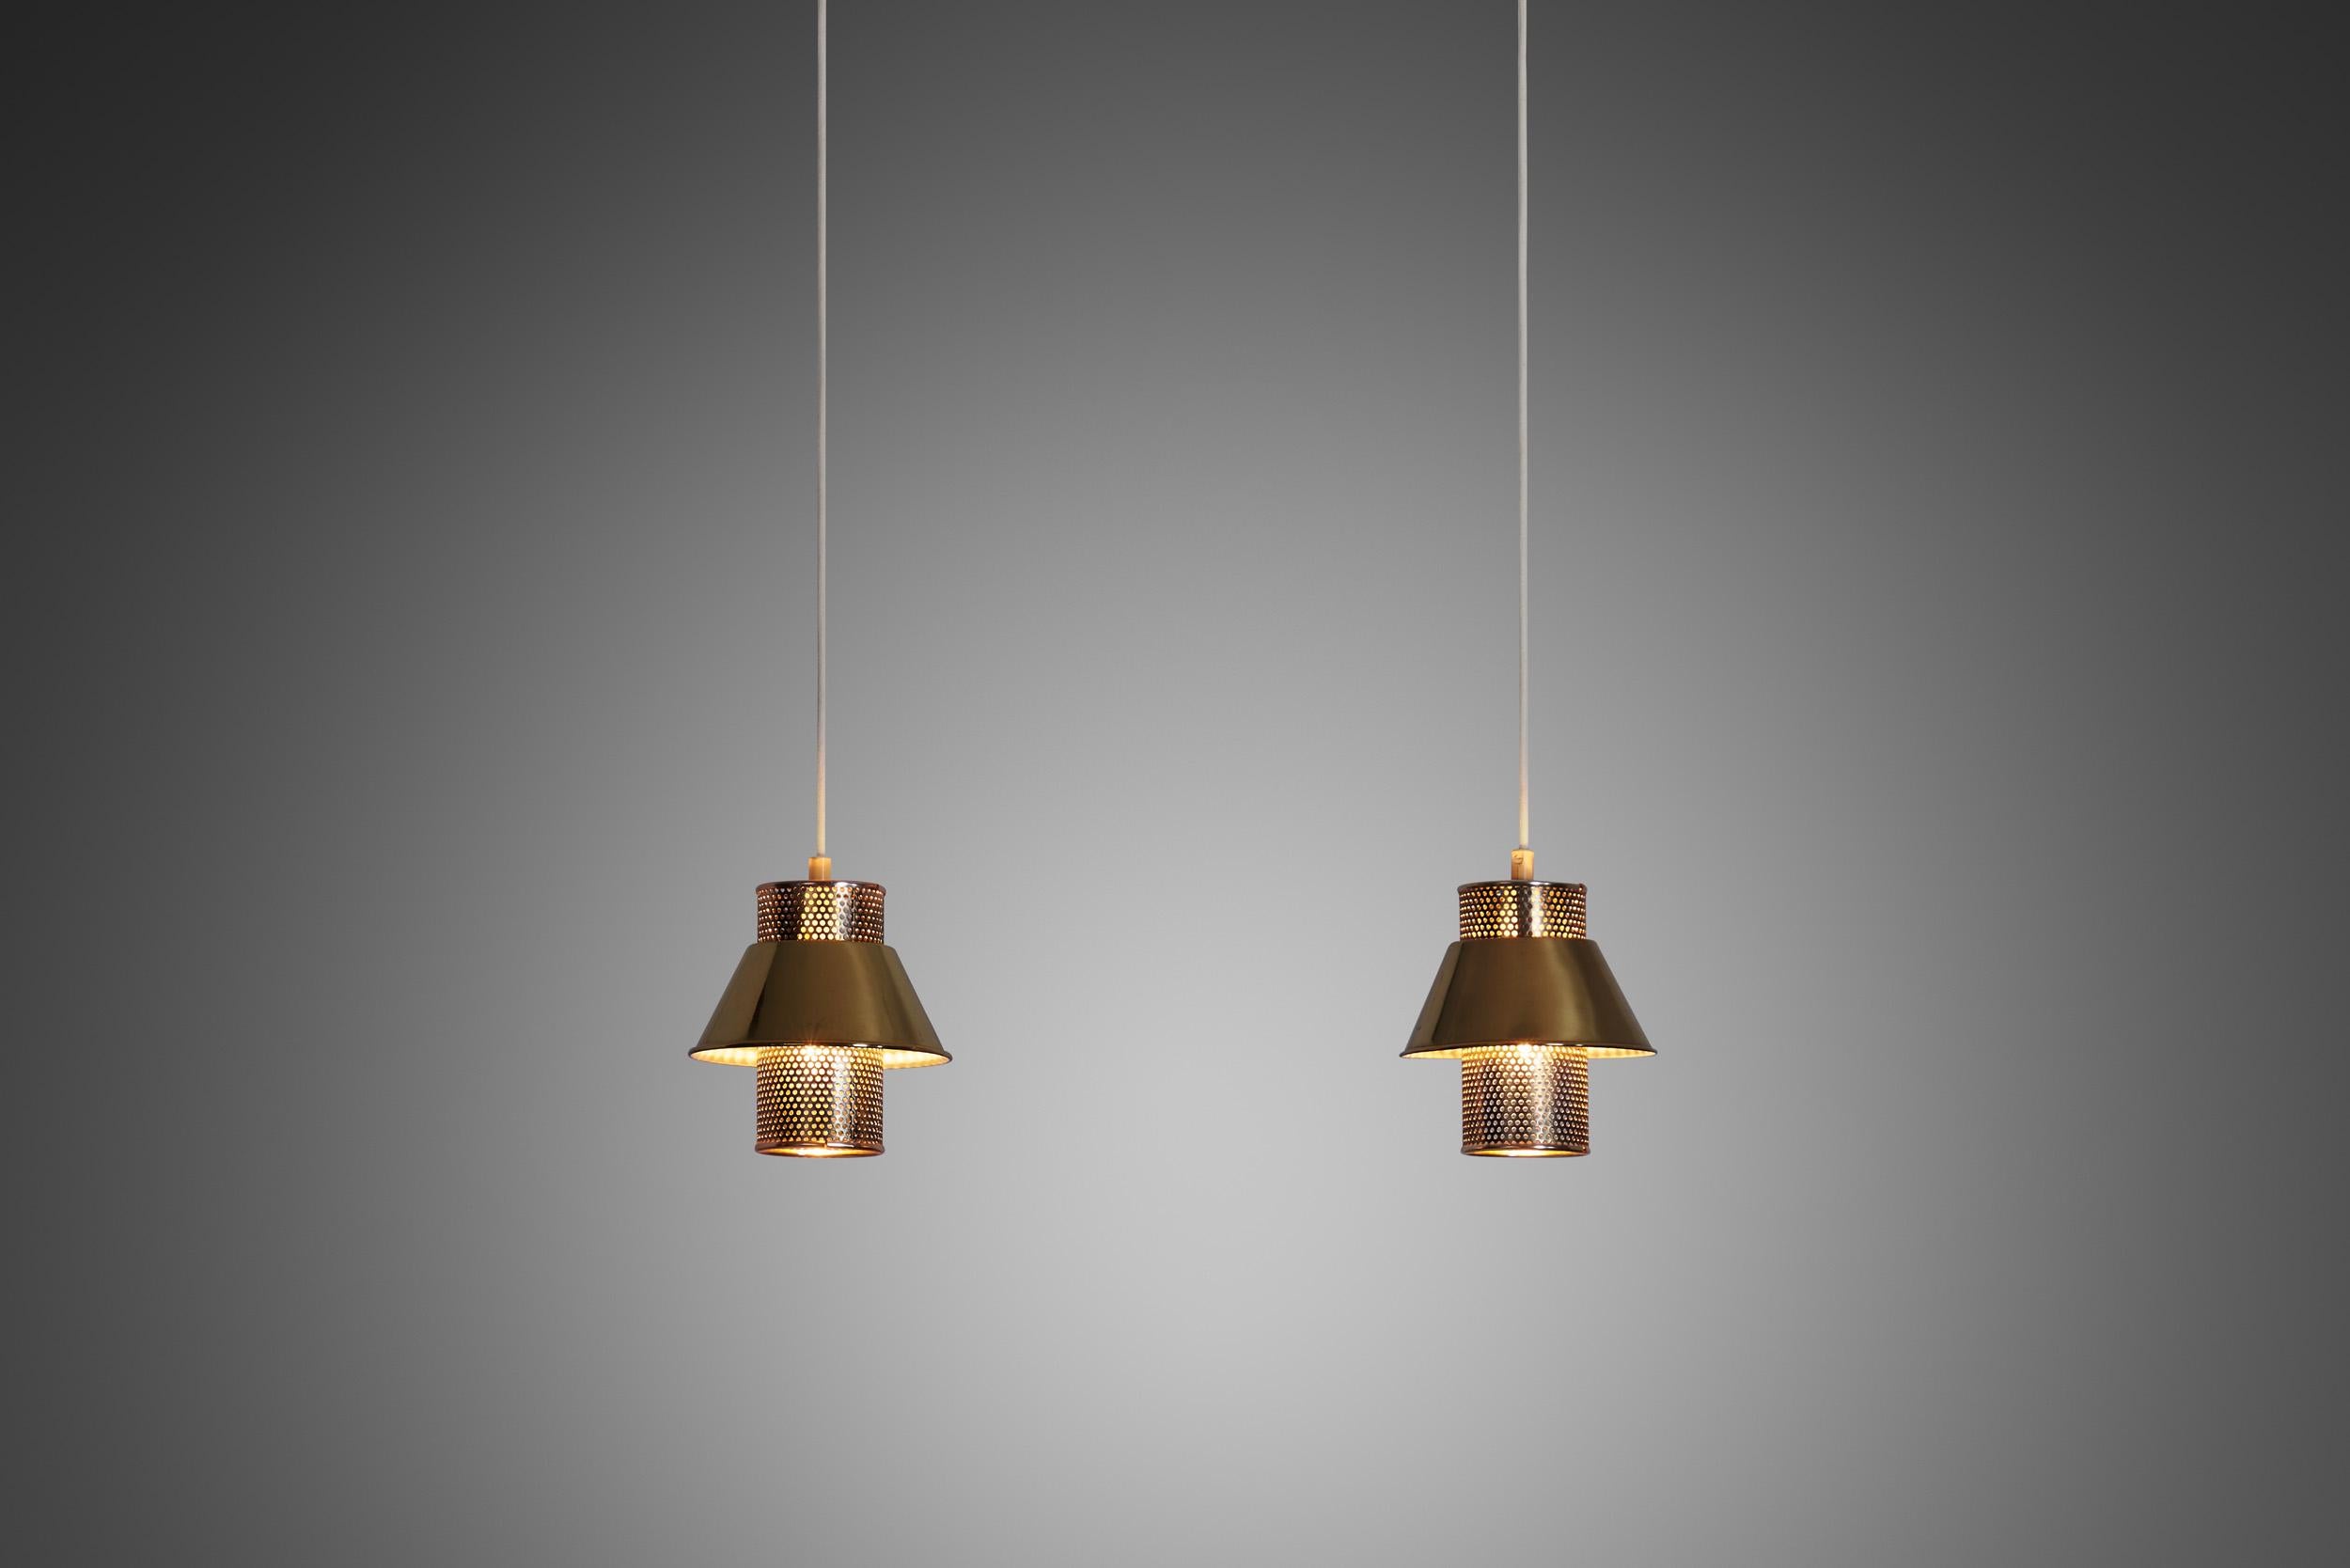 The T766 pendant lamp is a stunning example of Swedish modern design. Hans-Agne Jakobsson was a prominent designer and lighting manufacturer who played a crucial role in shaping the aesthetic of Swedish design during the mid- and even later part of